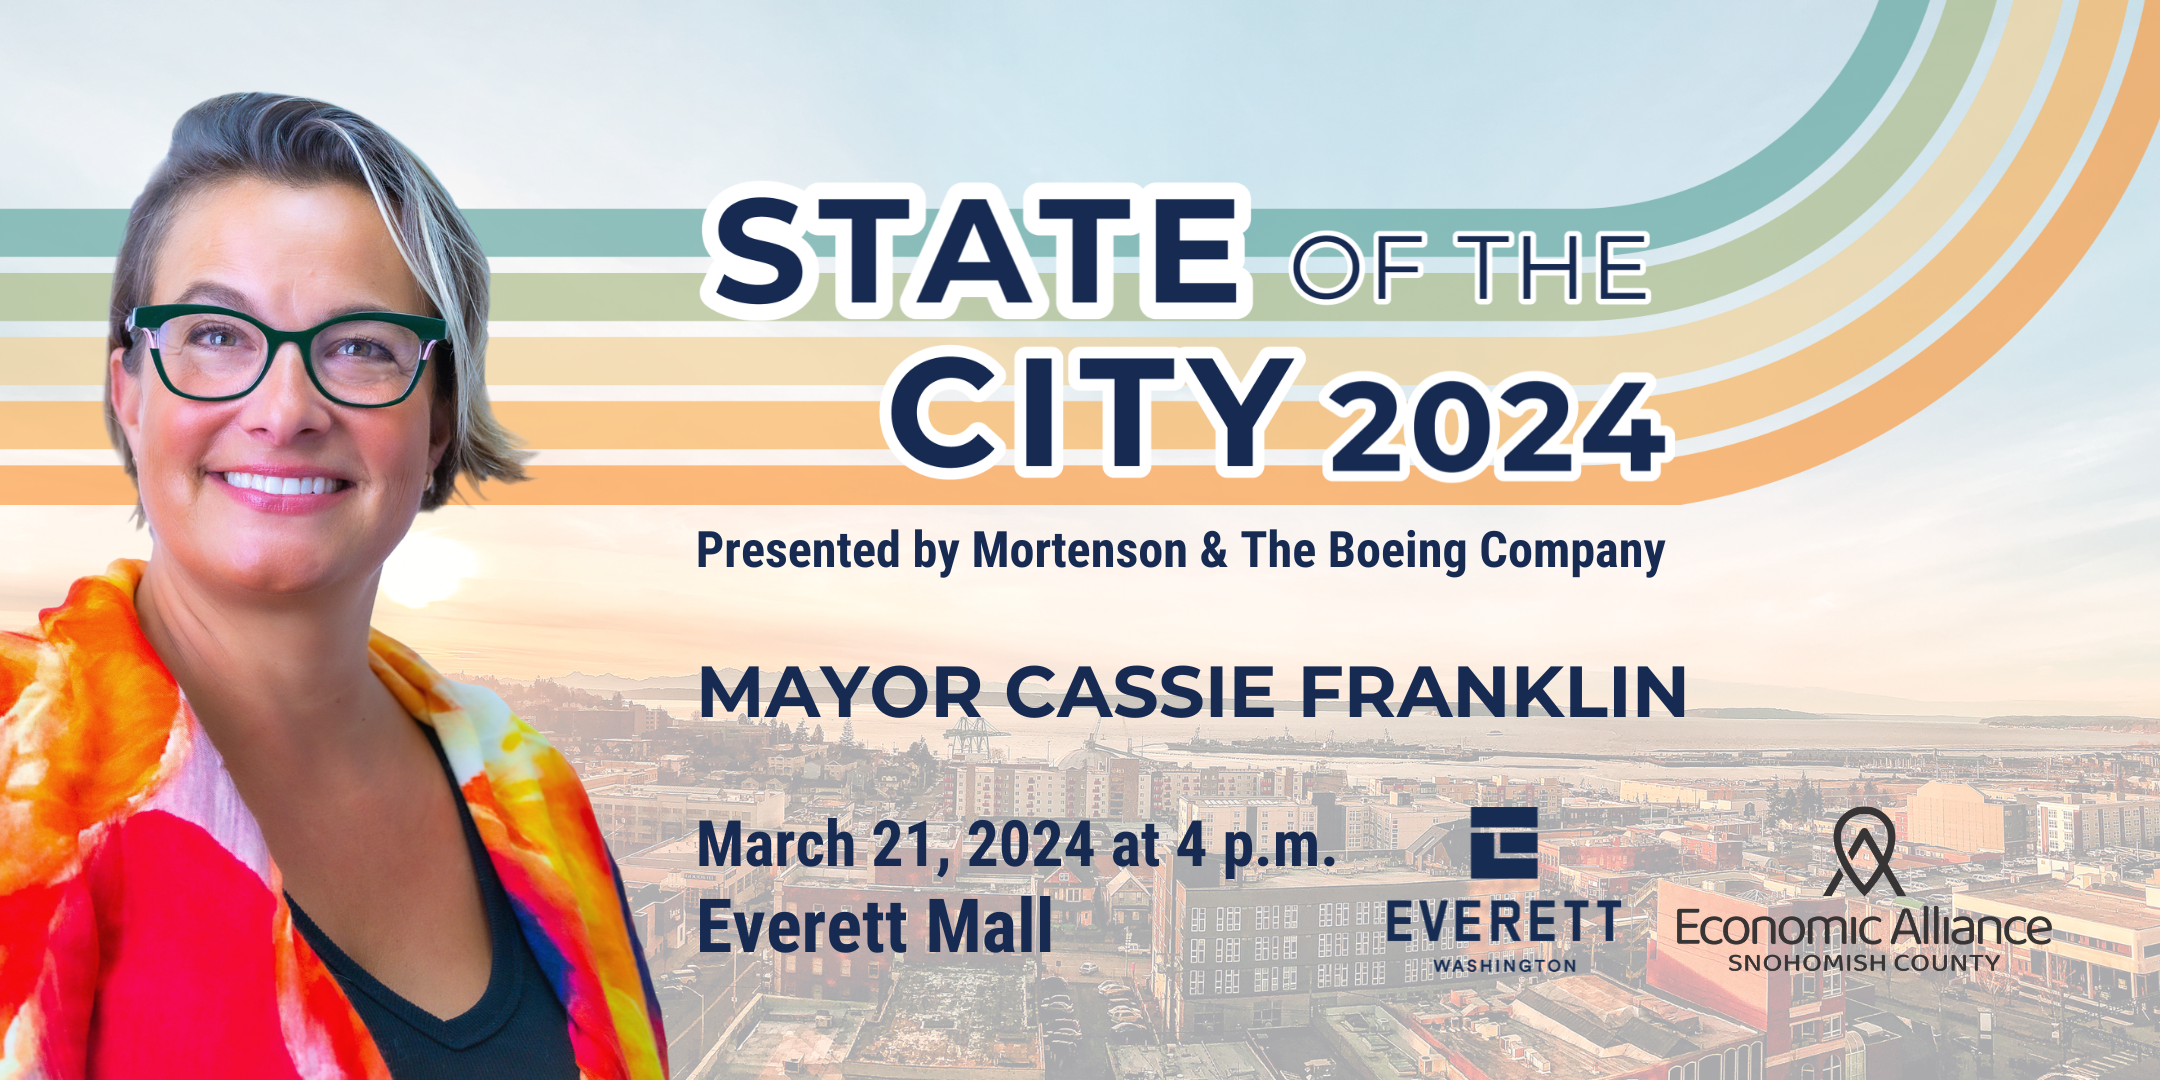 Event Promo Photo For 2024 State of the City